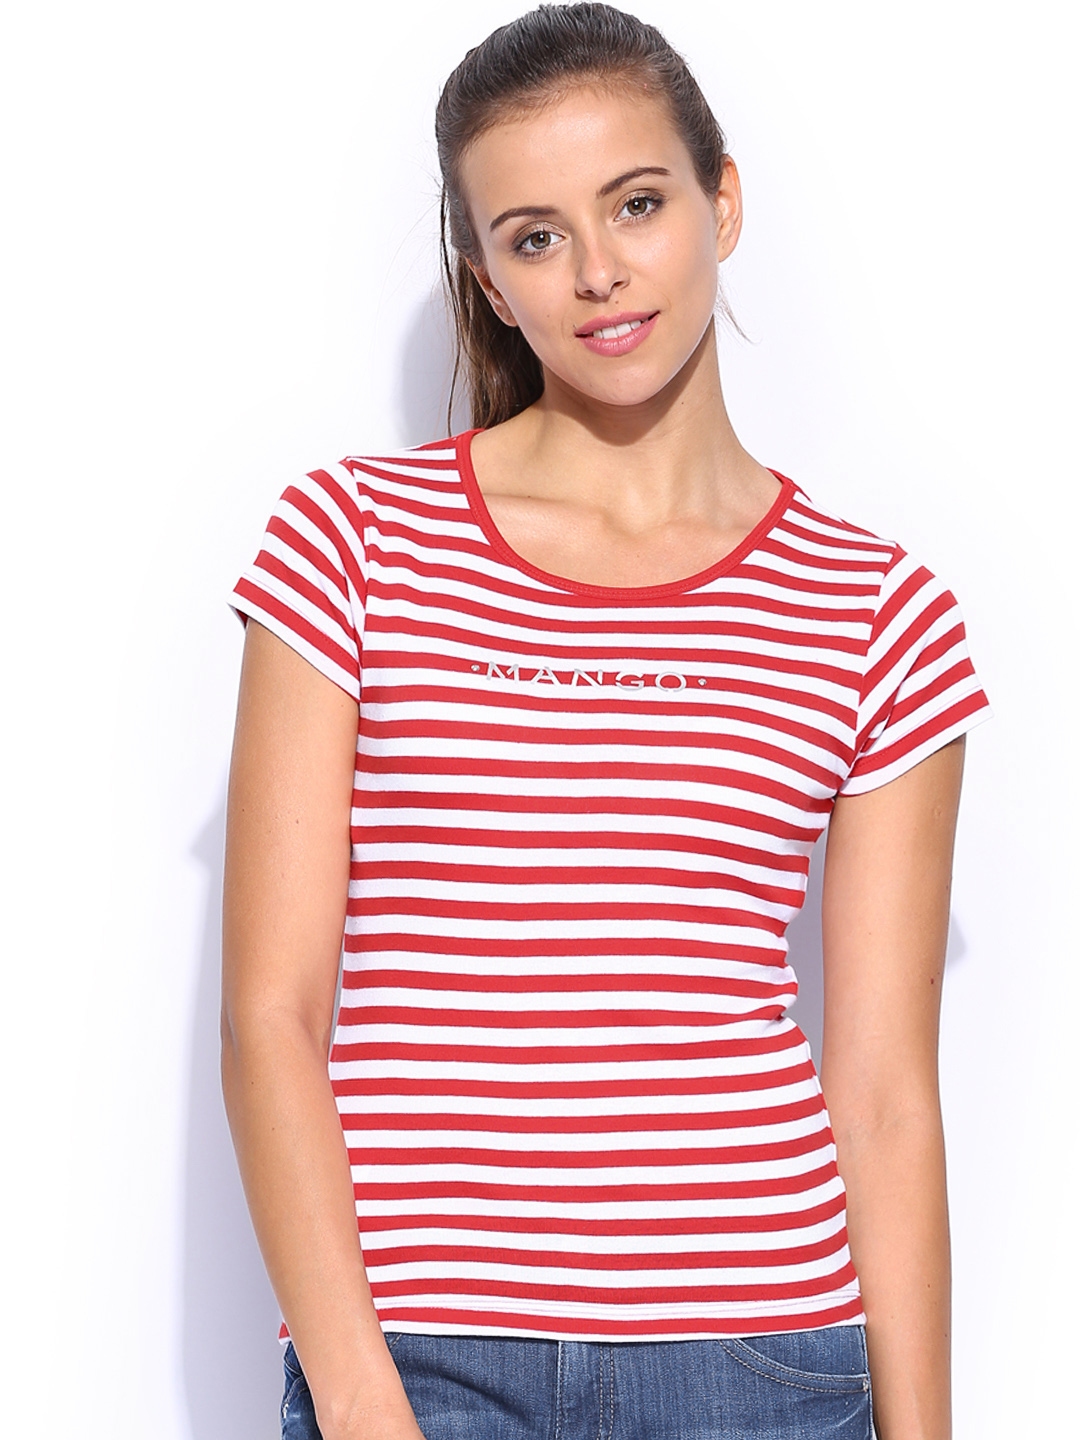 white red striped t shirt